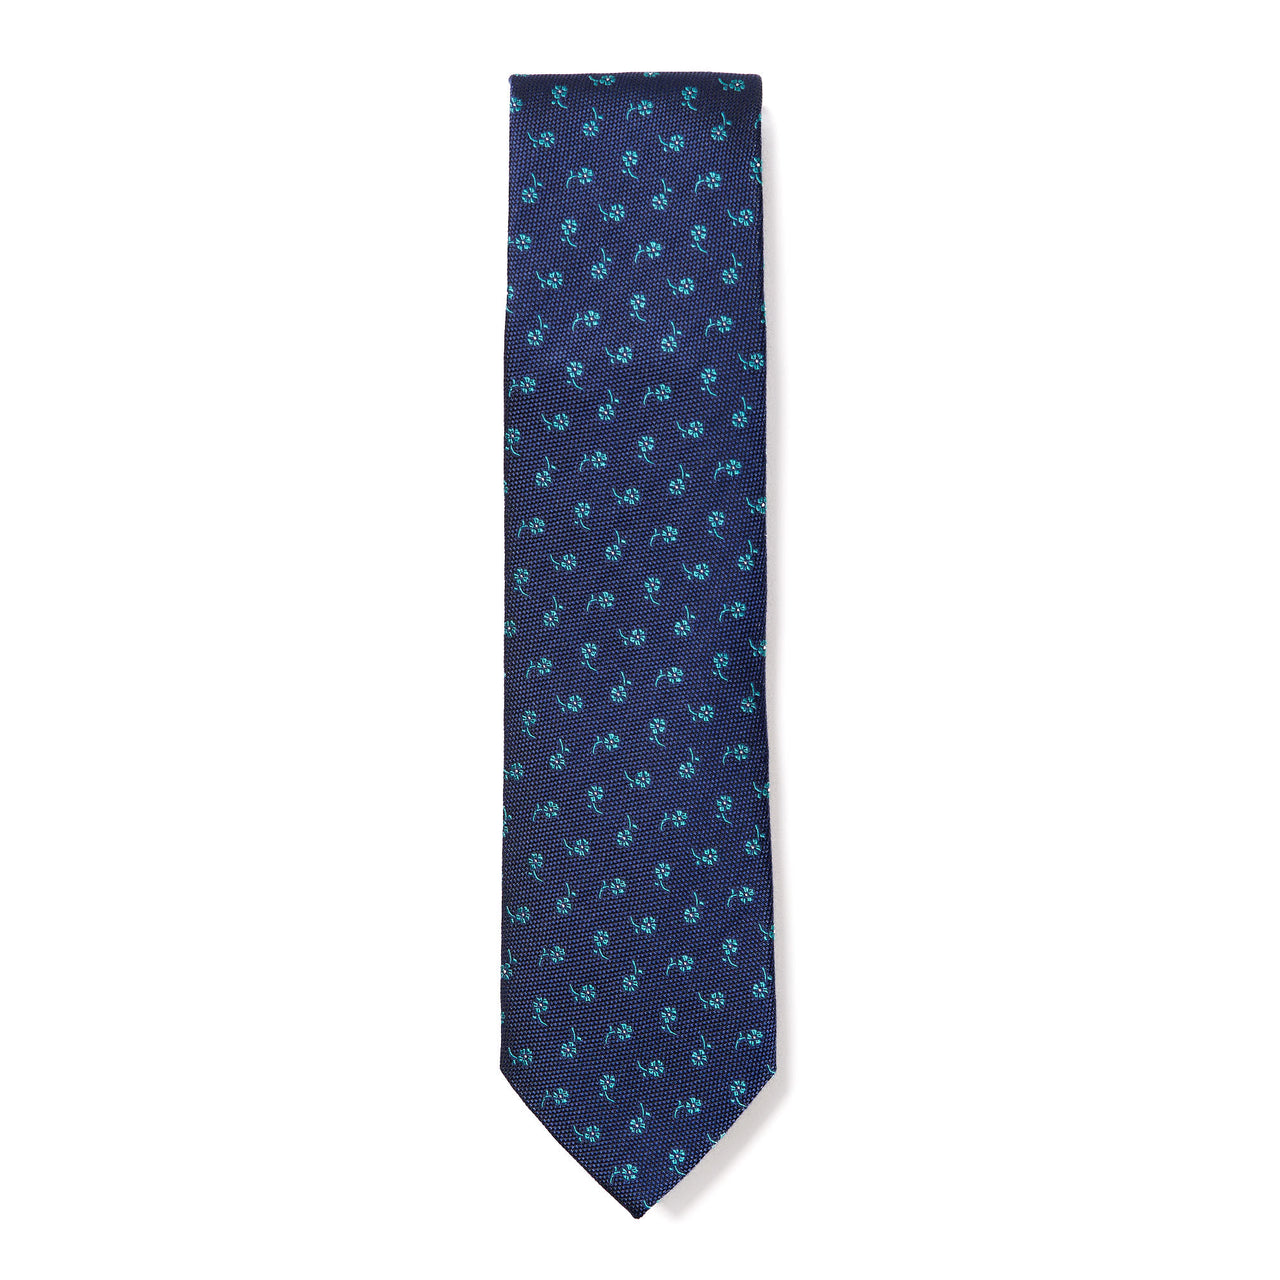 HENRY SARTORIAL X CANTINI Floral Tie BLUE/TEAL